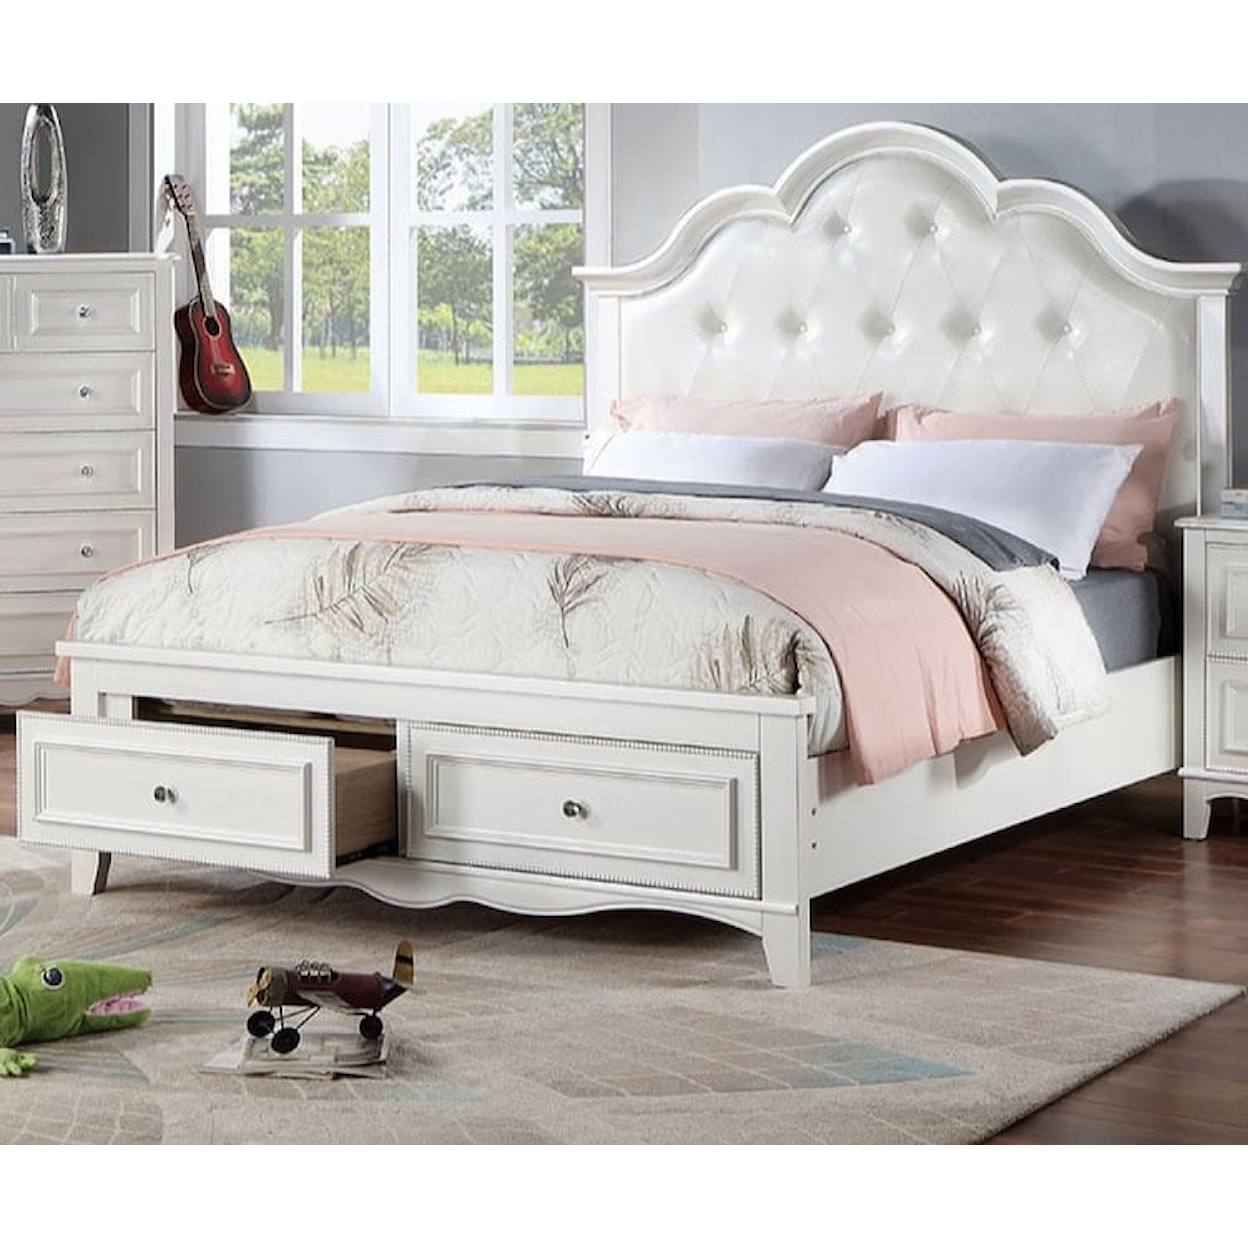 Furniture of America CADENCE Upholstered Twin Bed with Footboard Storage